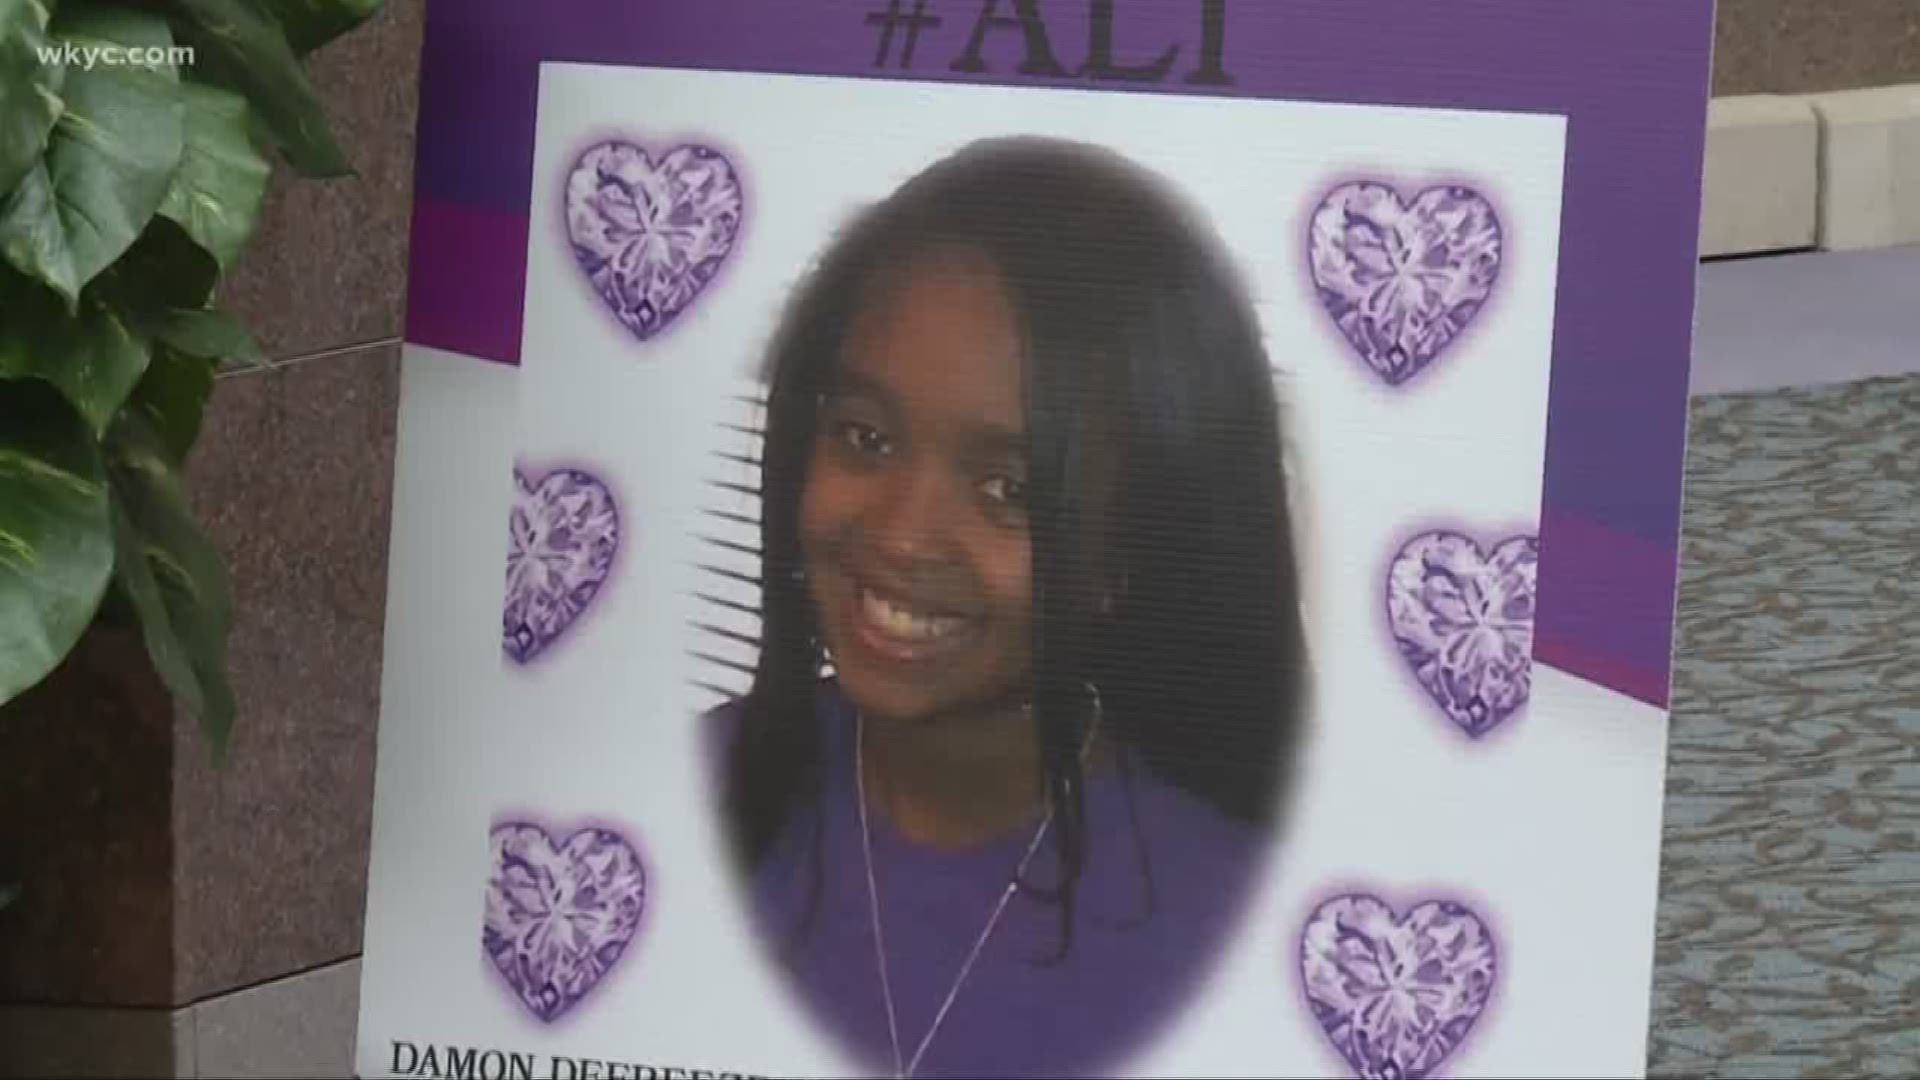 The two-year anniversary memorial was held at the same place Alianna was laid to rest.